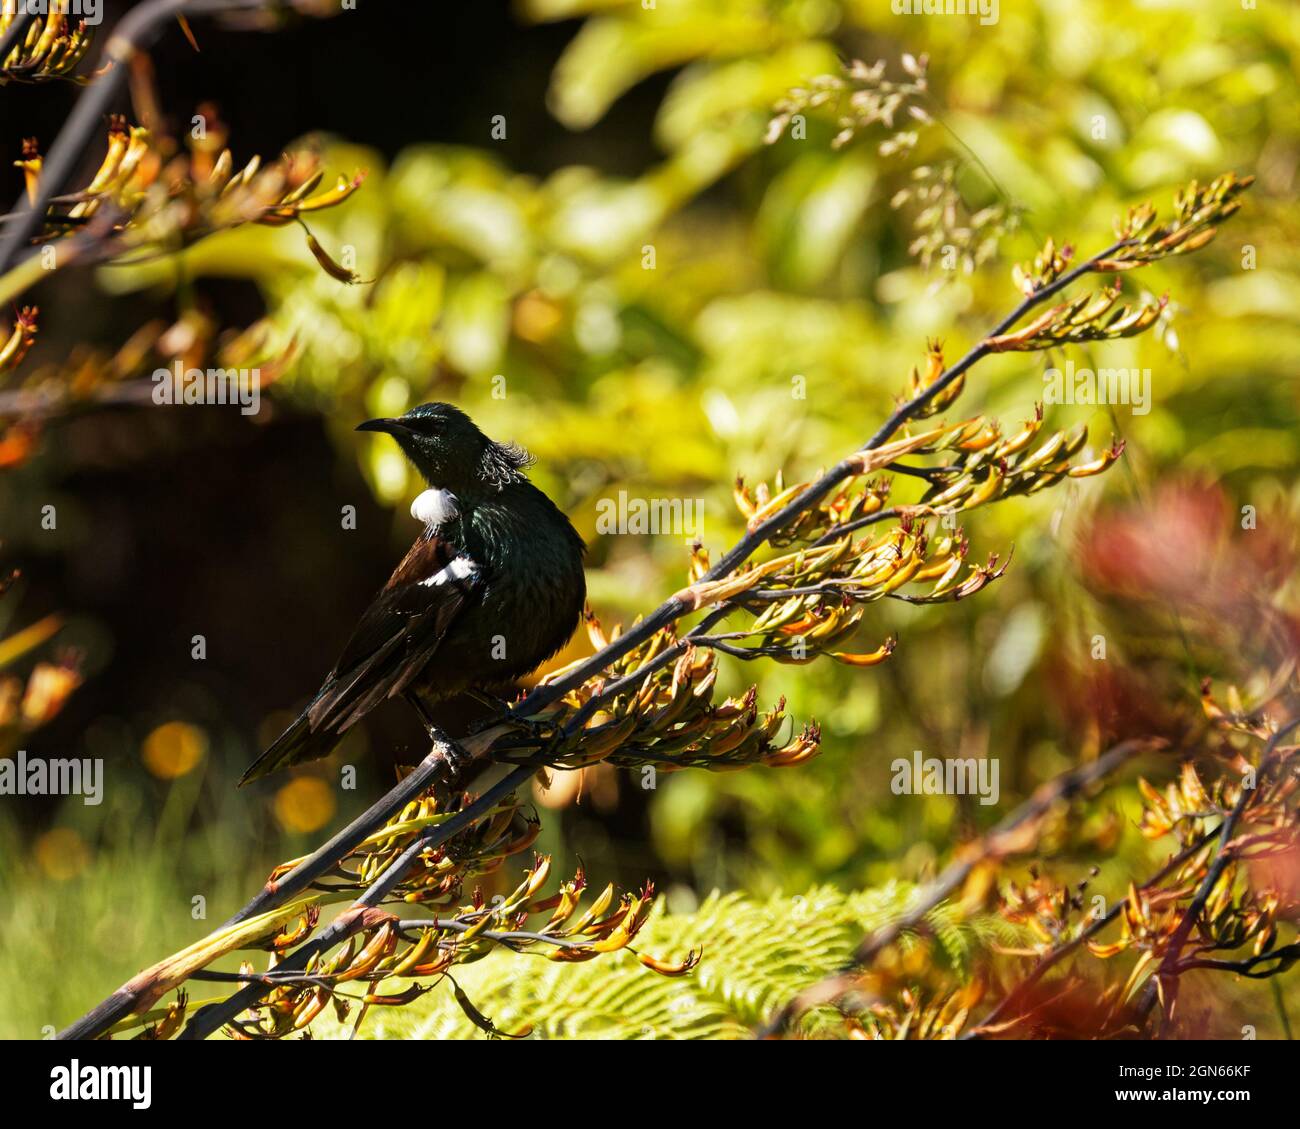 Tui, endemic passerine bird of New Zealand, on a flax plant Stock Photo